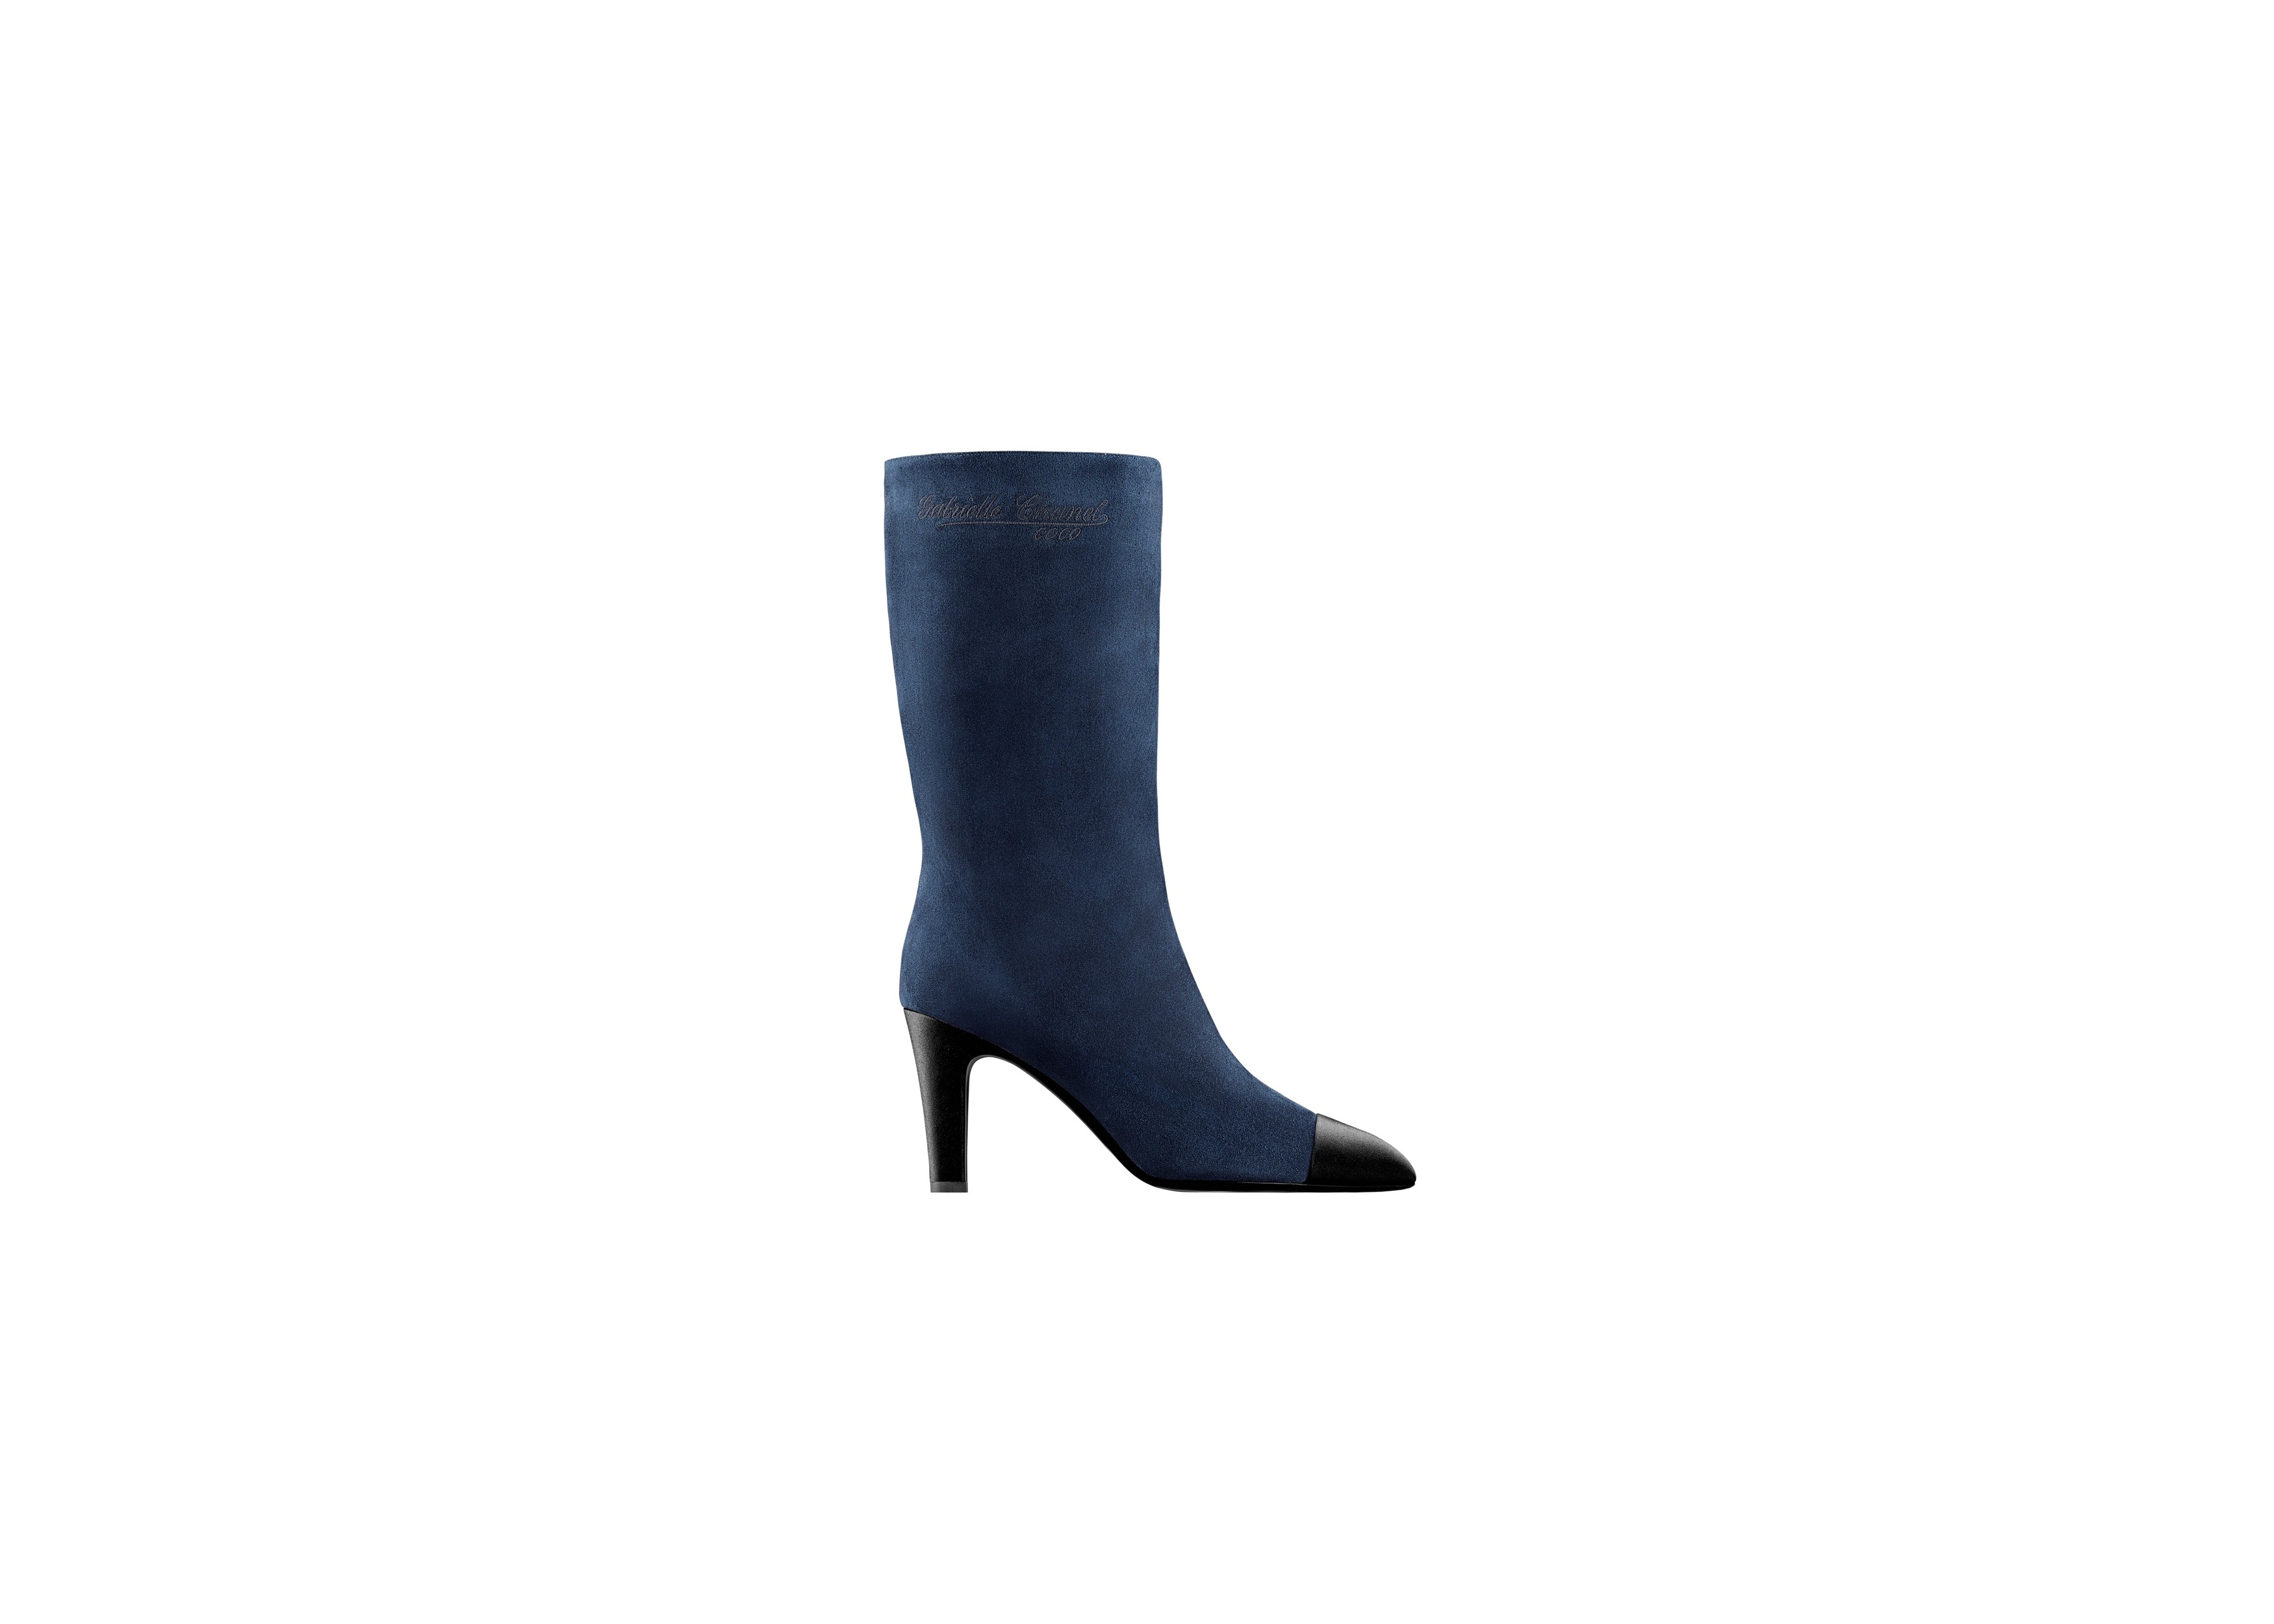 Step out in Chanel’s navy suede boots and enjoy the envious glances that come your way